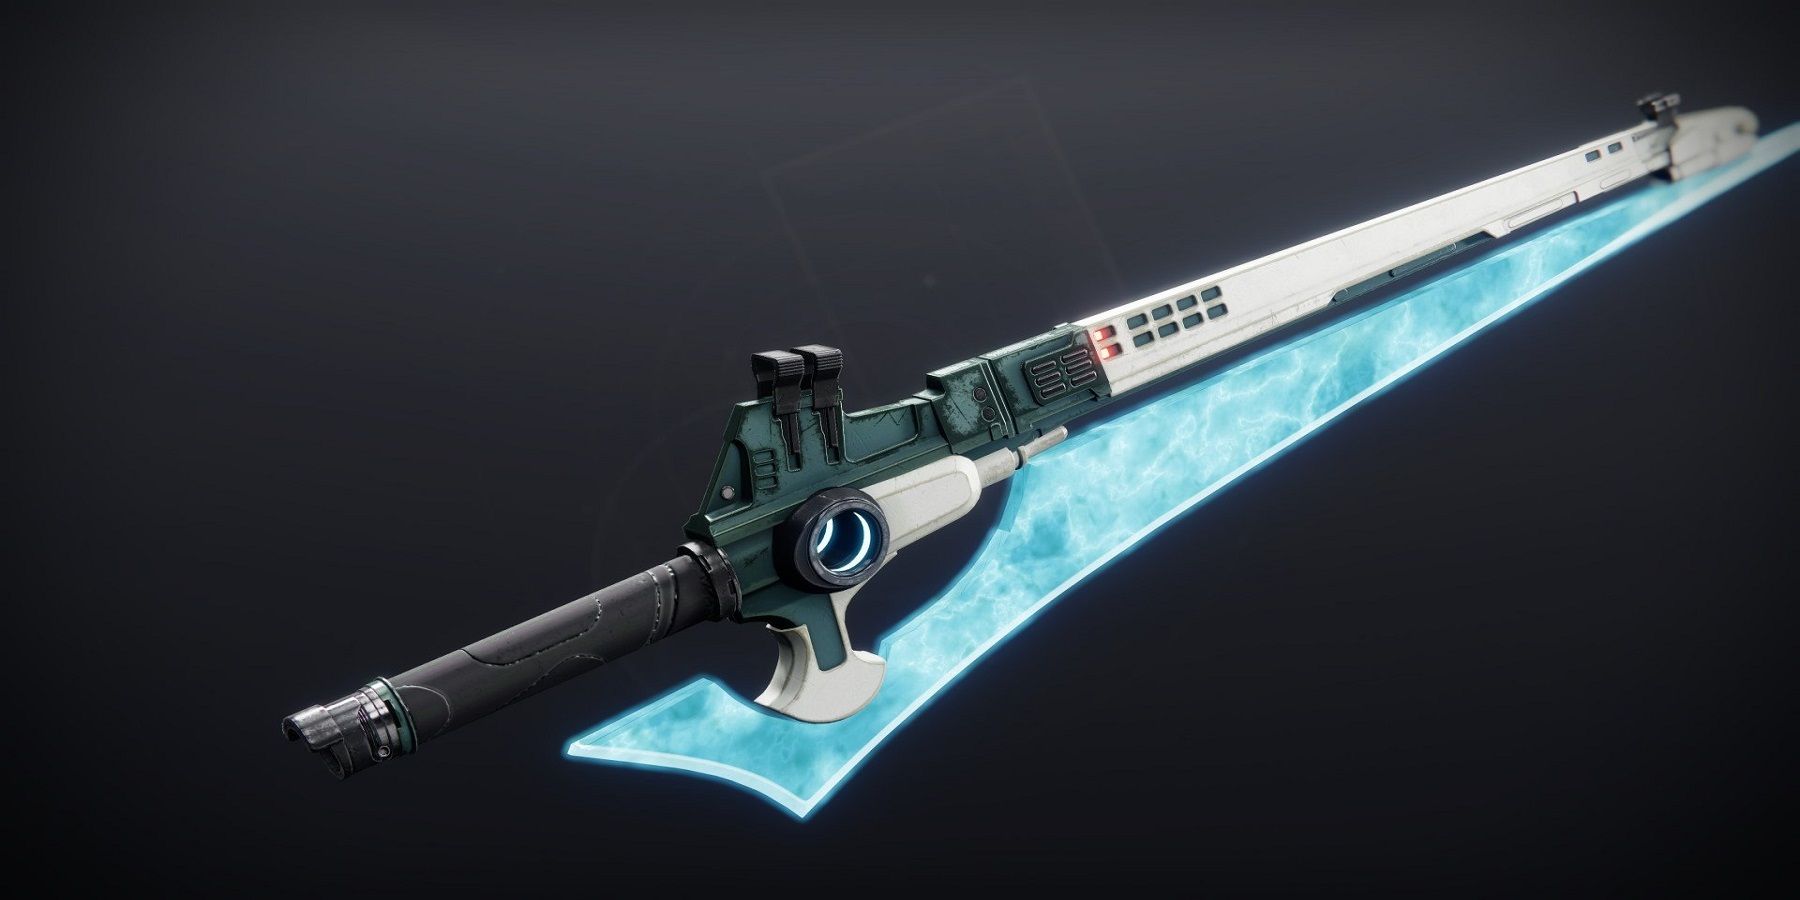 Sword-skating is back in Destiny 2 thanks to the new anniversary sword Half Truths.